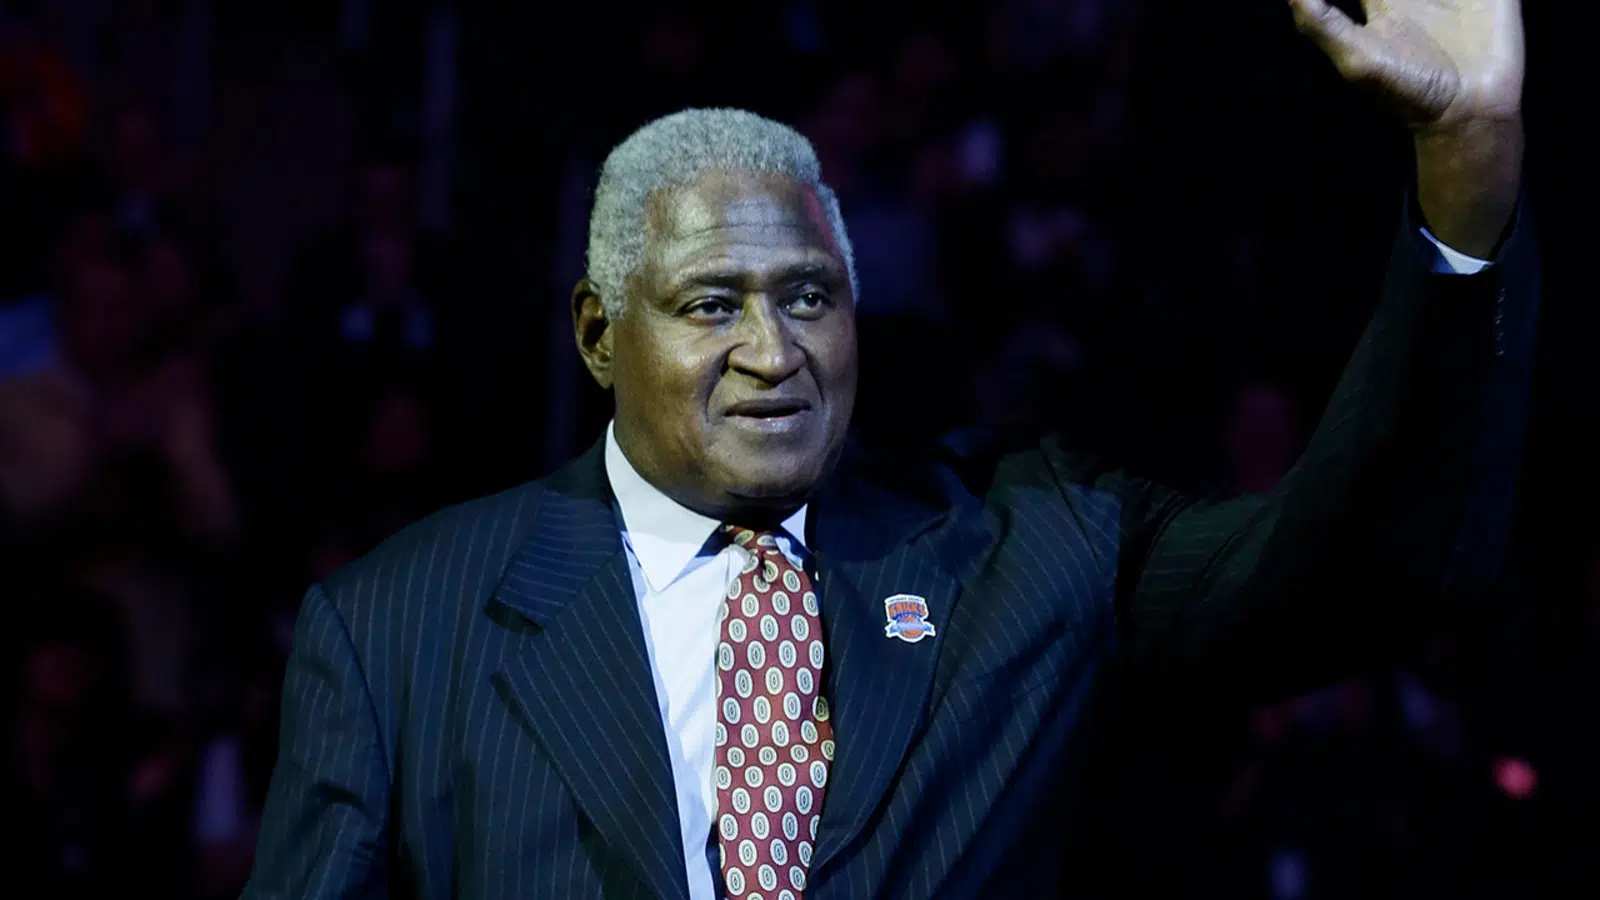 Louisiana and New York Knicks Legend, Willis Reed, dead at 80